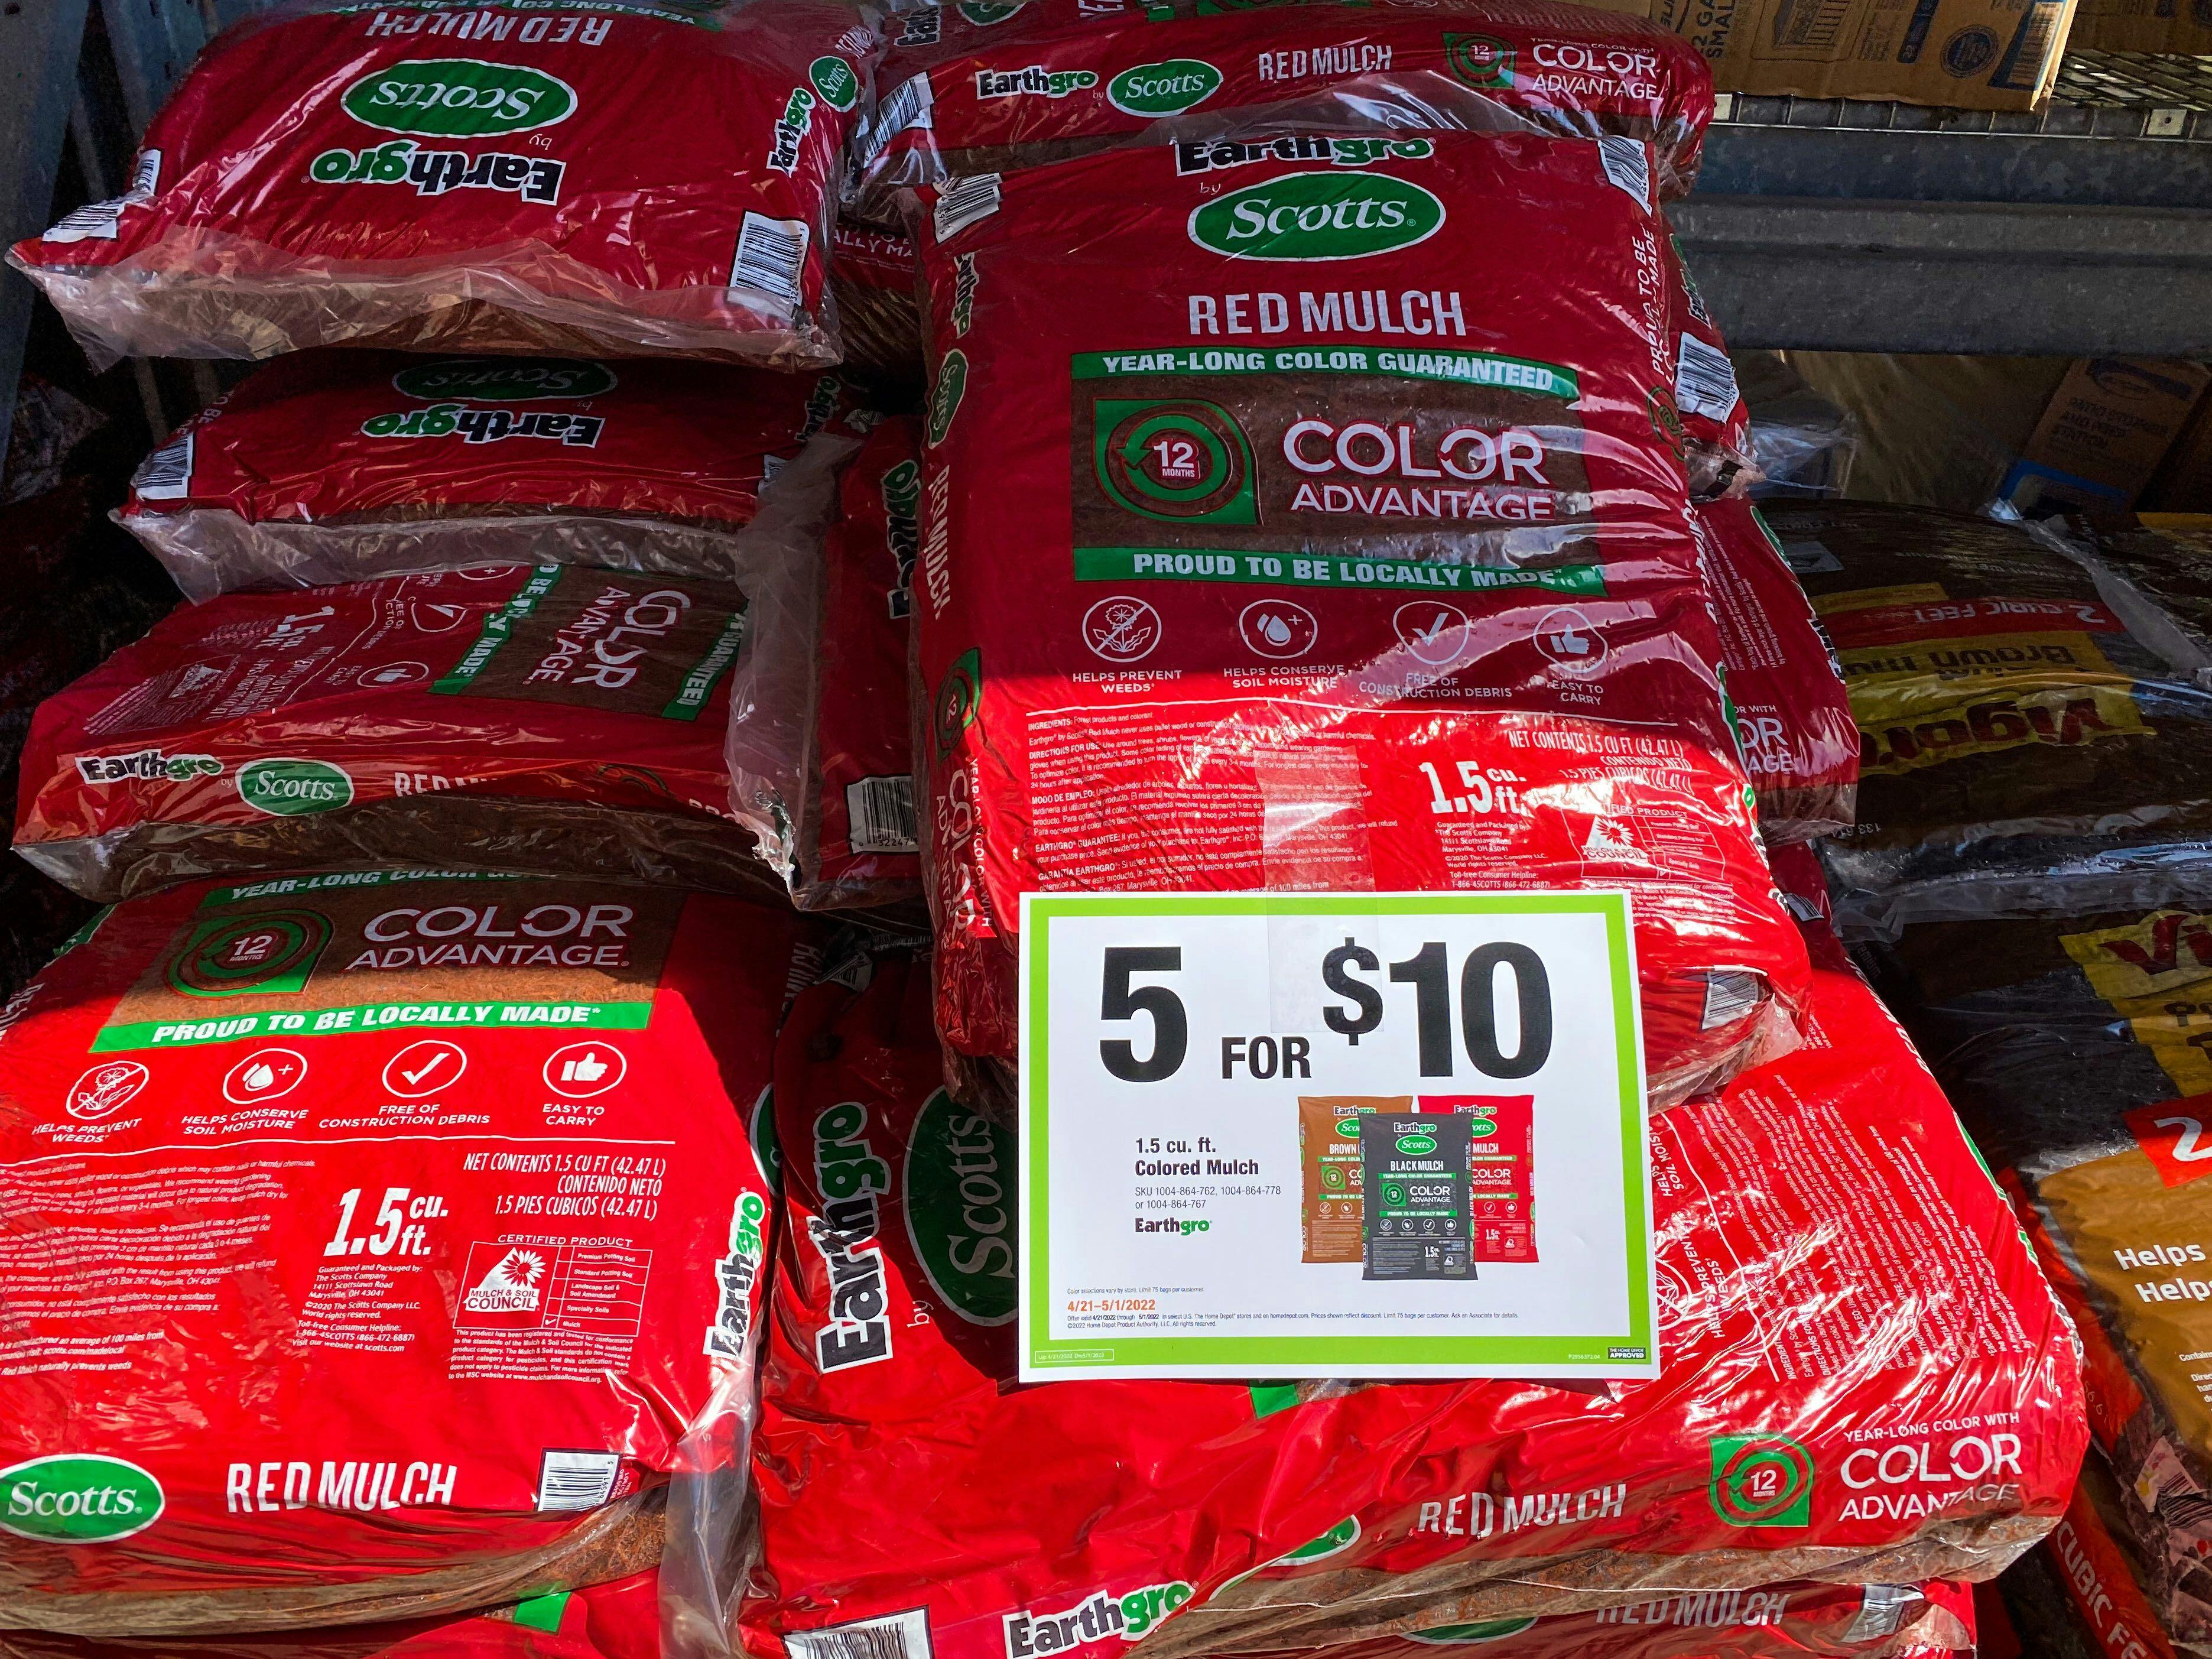 scotts earthgro mulch bags at Home depot with a "5 for $10" sale on top of them